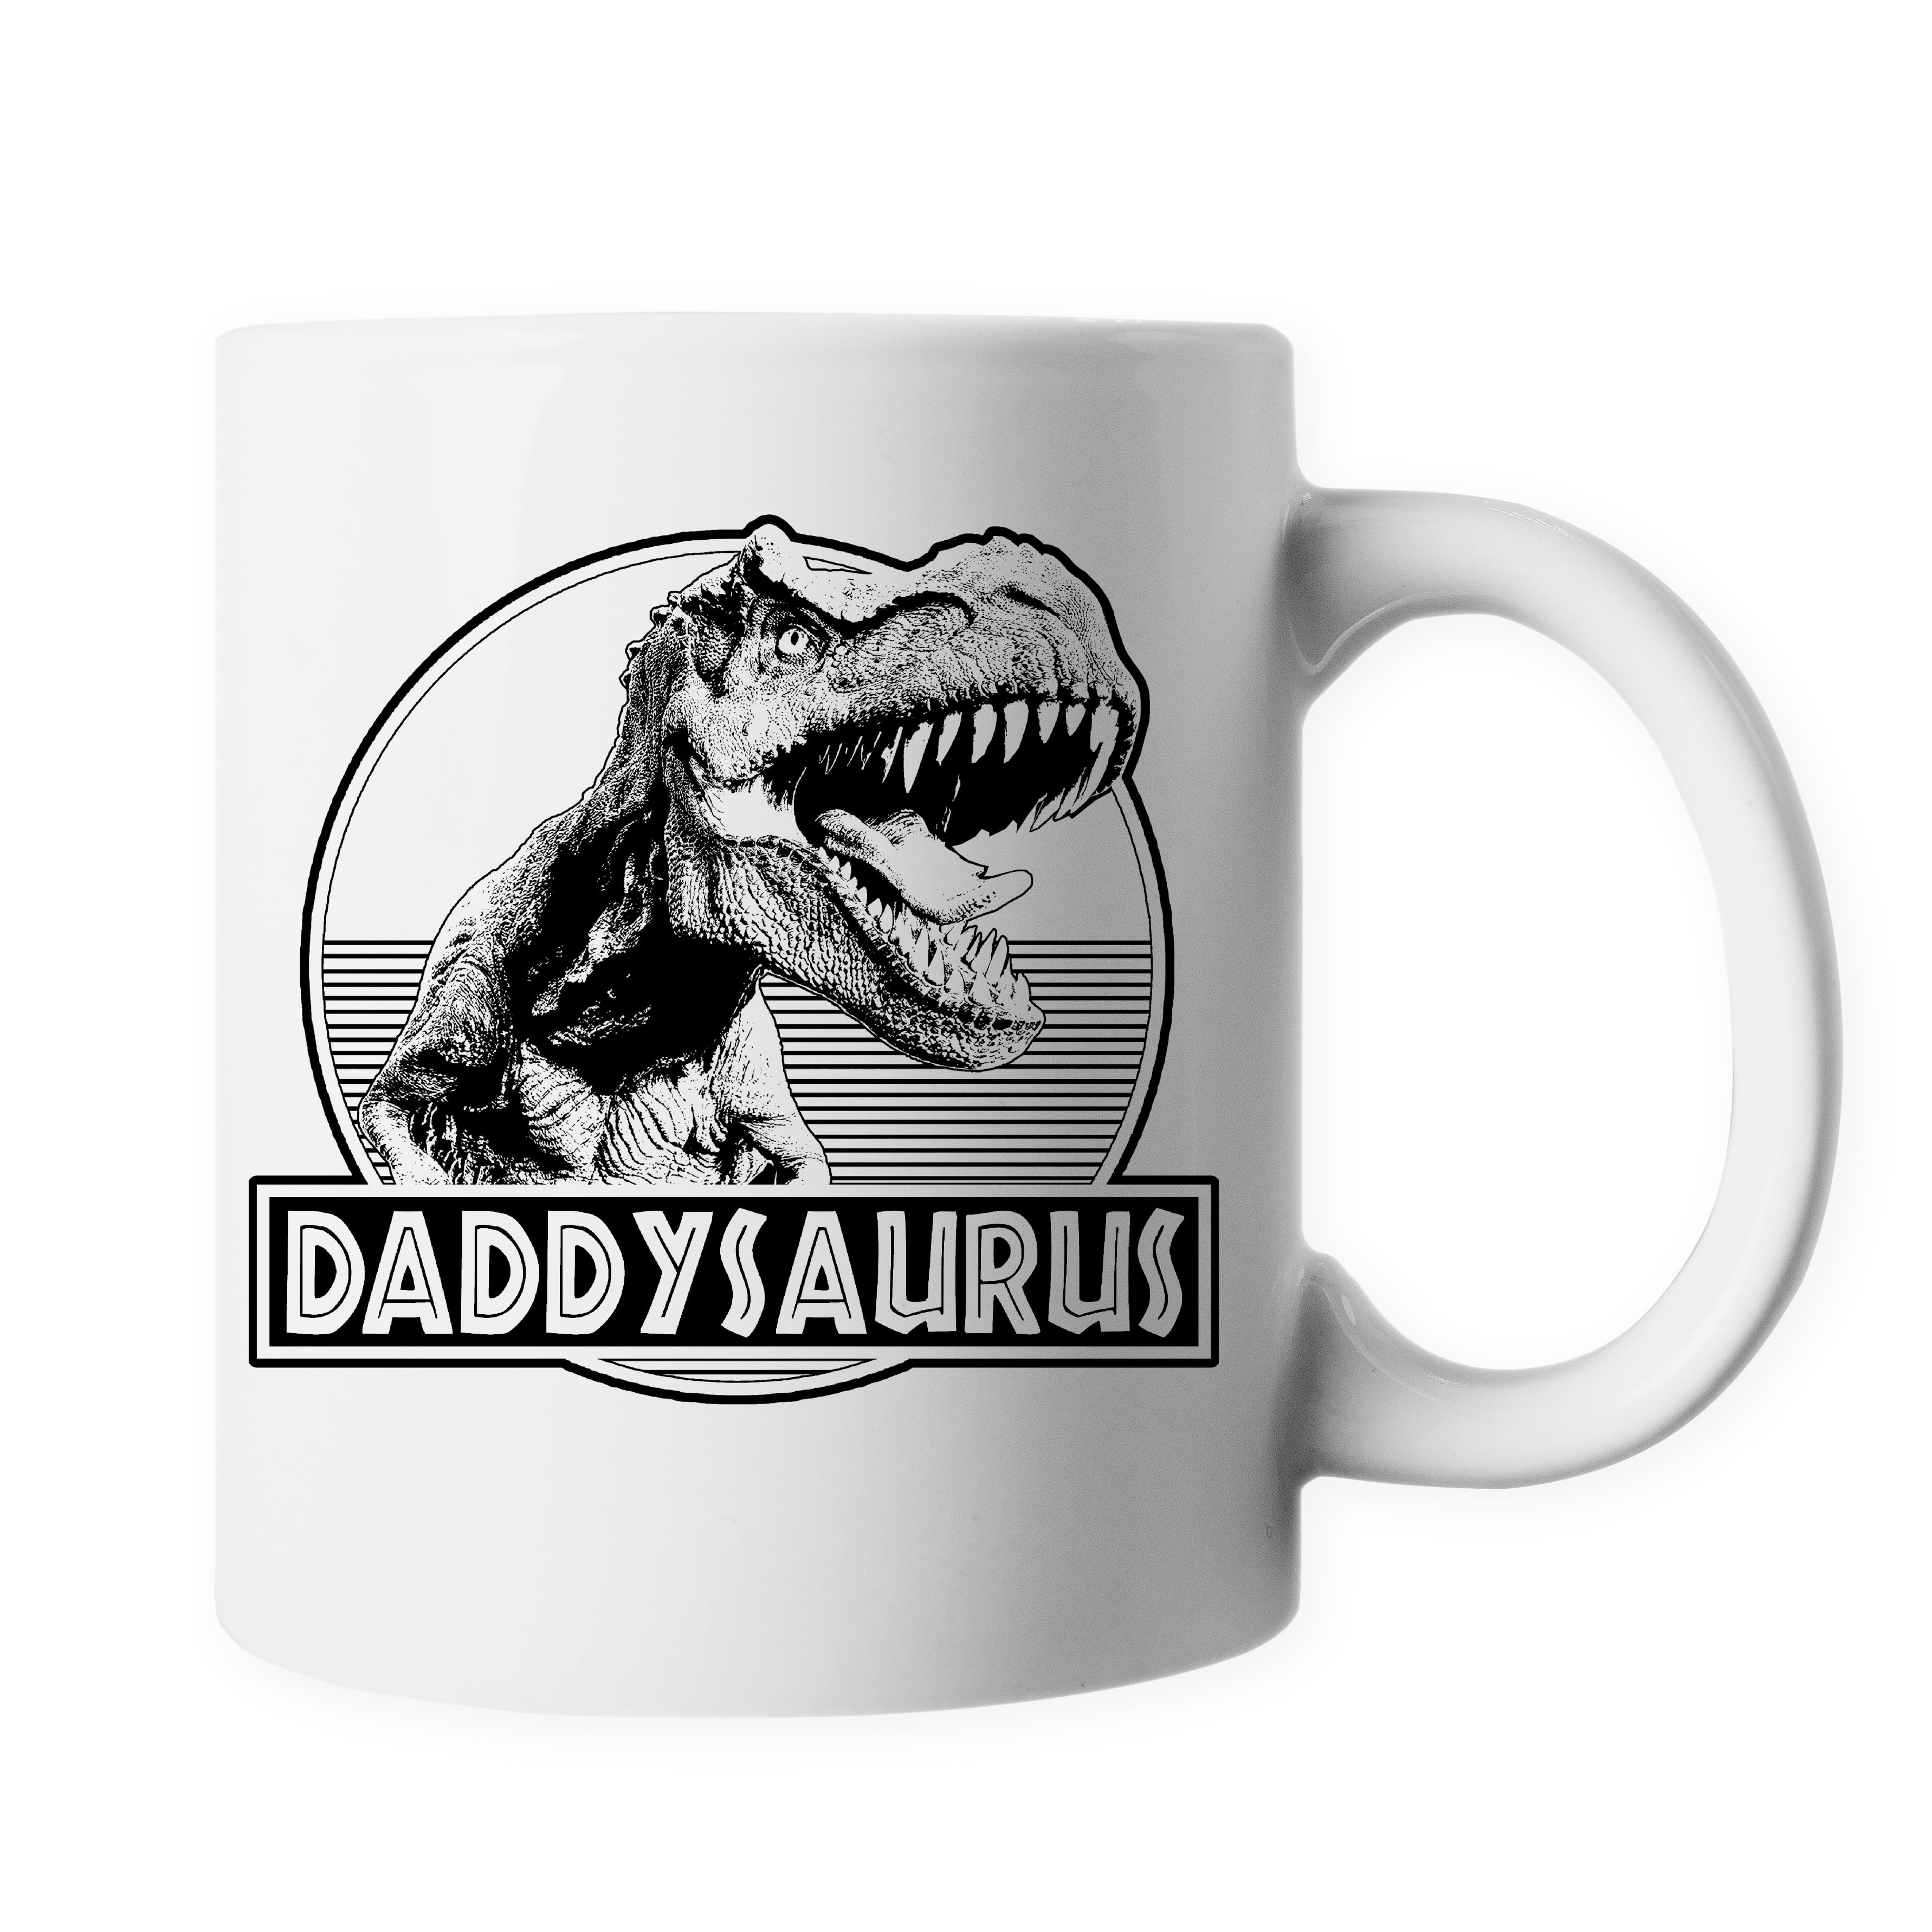 Tea-rex Dinosaur Funny Coffee Mug 11oz Deluxe Double-Sided Unique Ceramic Novelty Holiday Christmas Gift for Men & Women Who Love Tea Mugs & Coffee Cups Fathers Day Gift Tyrannosaurus Rex Mug 